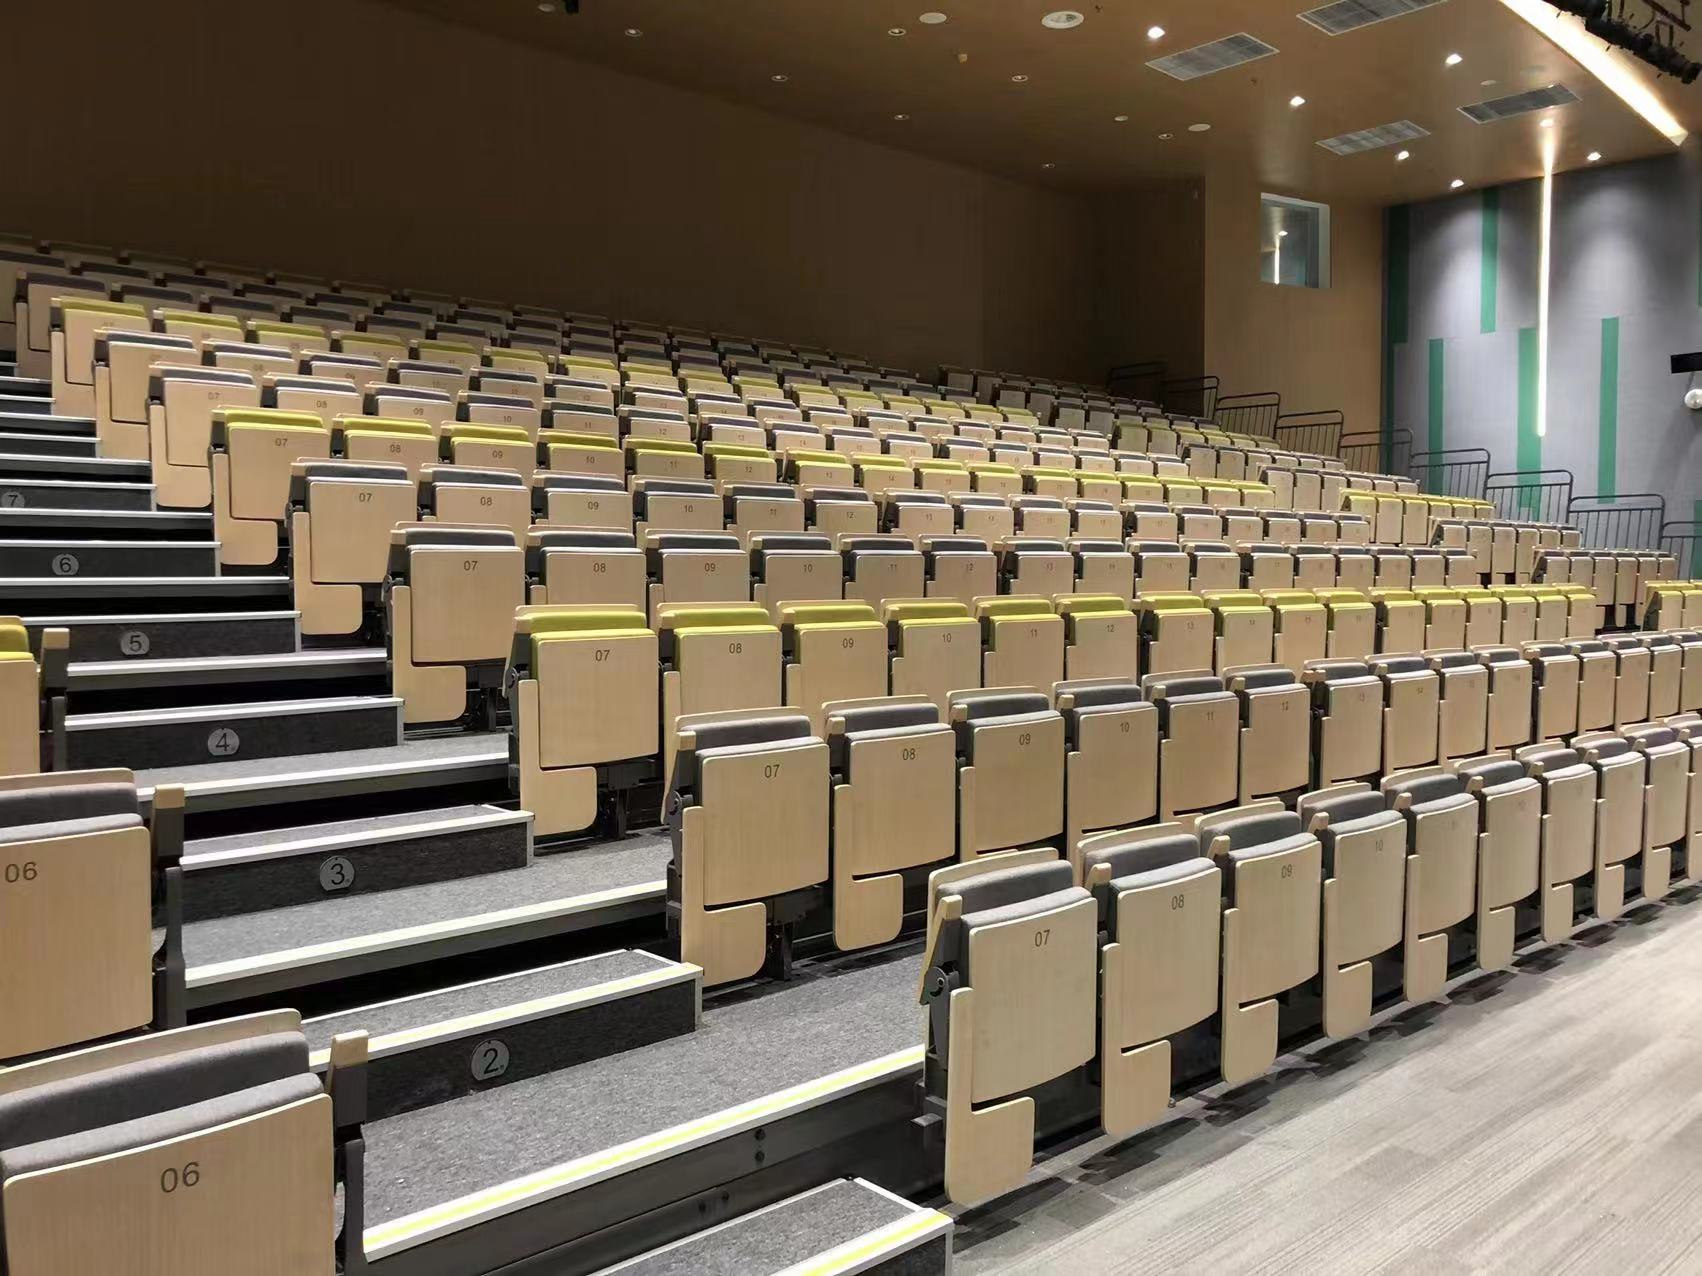 Transform your venue with top auditorium seating manufacturers15